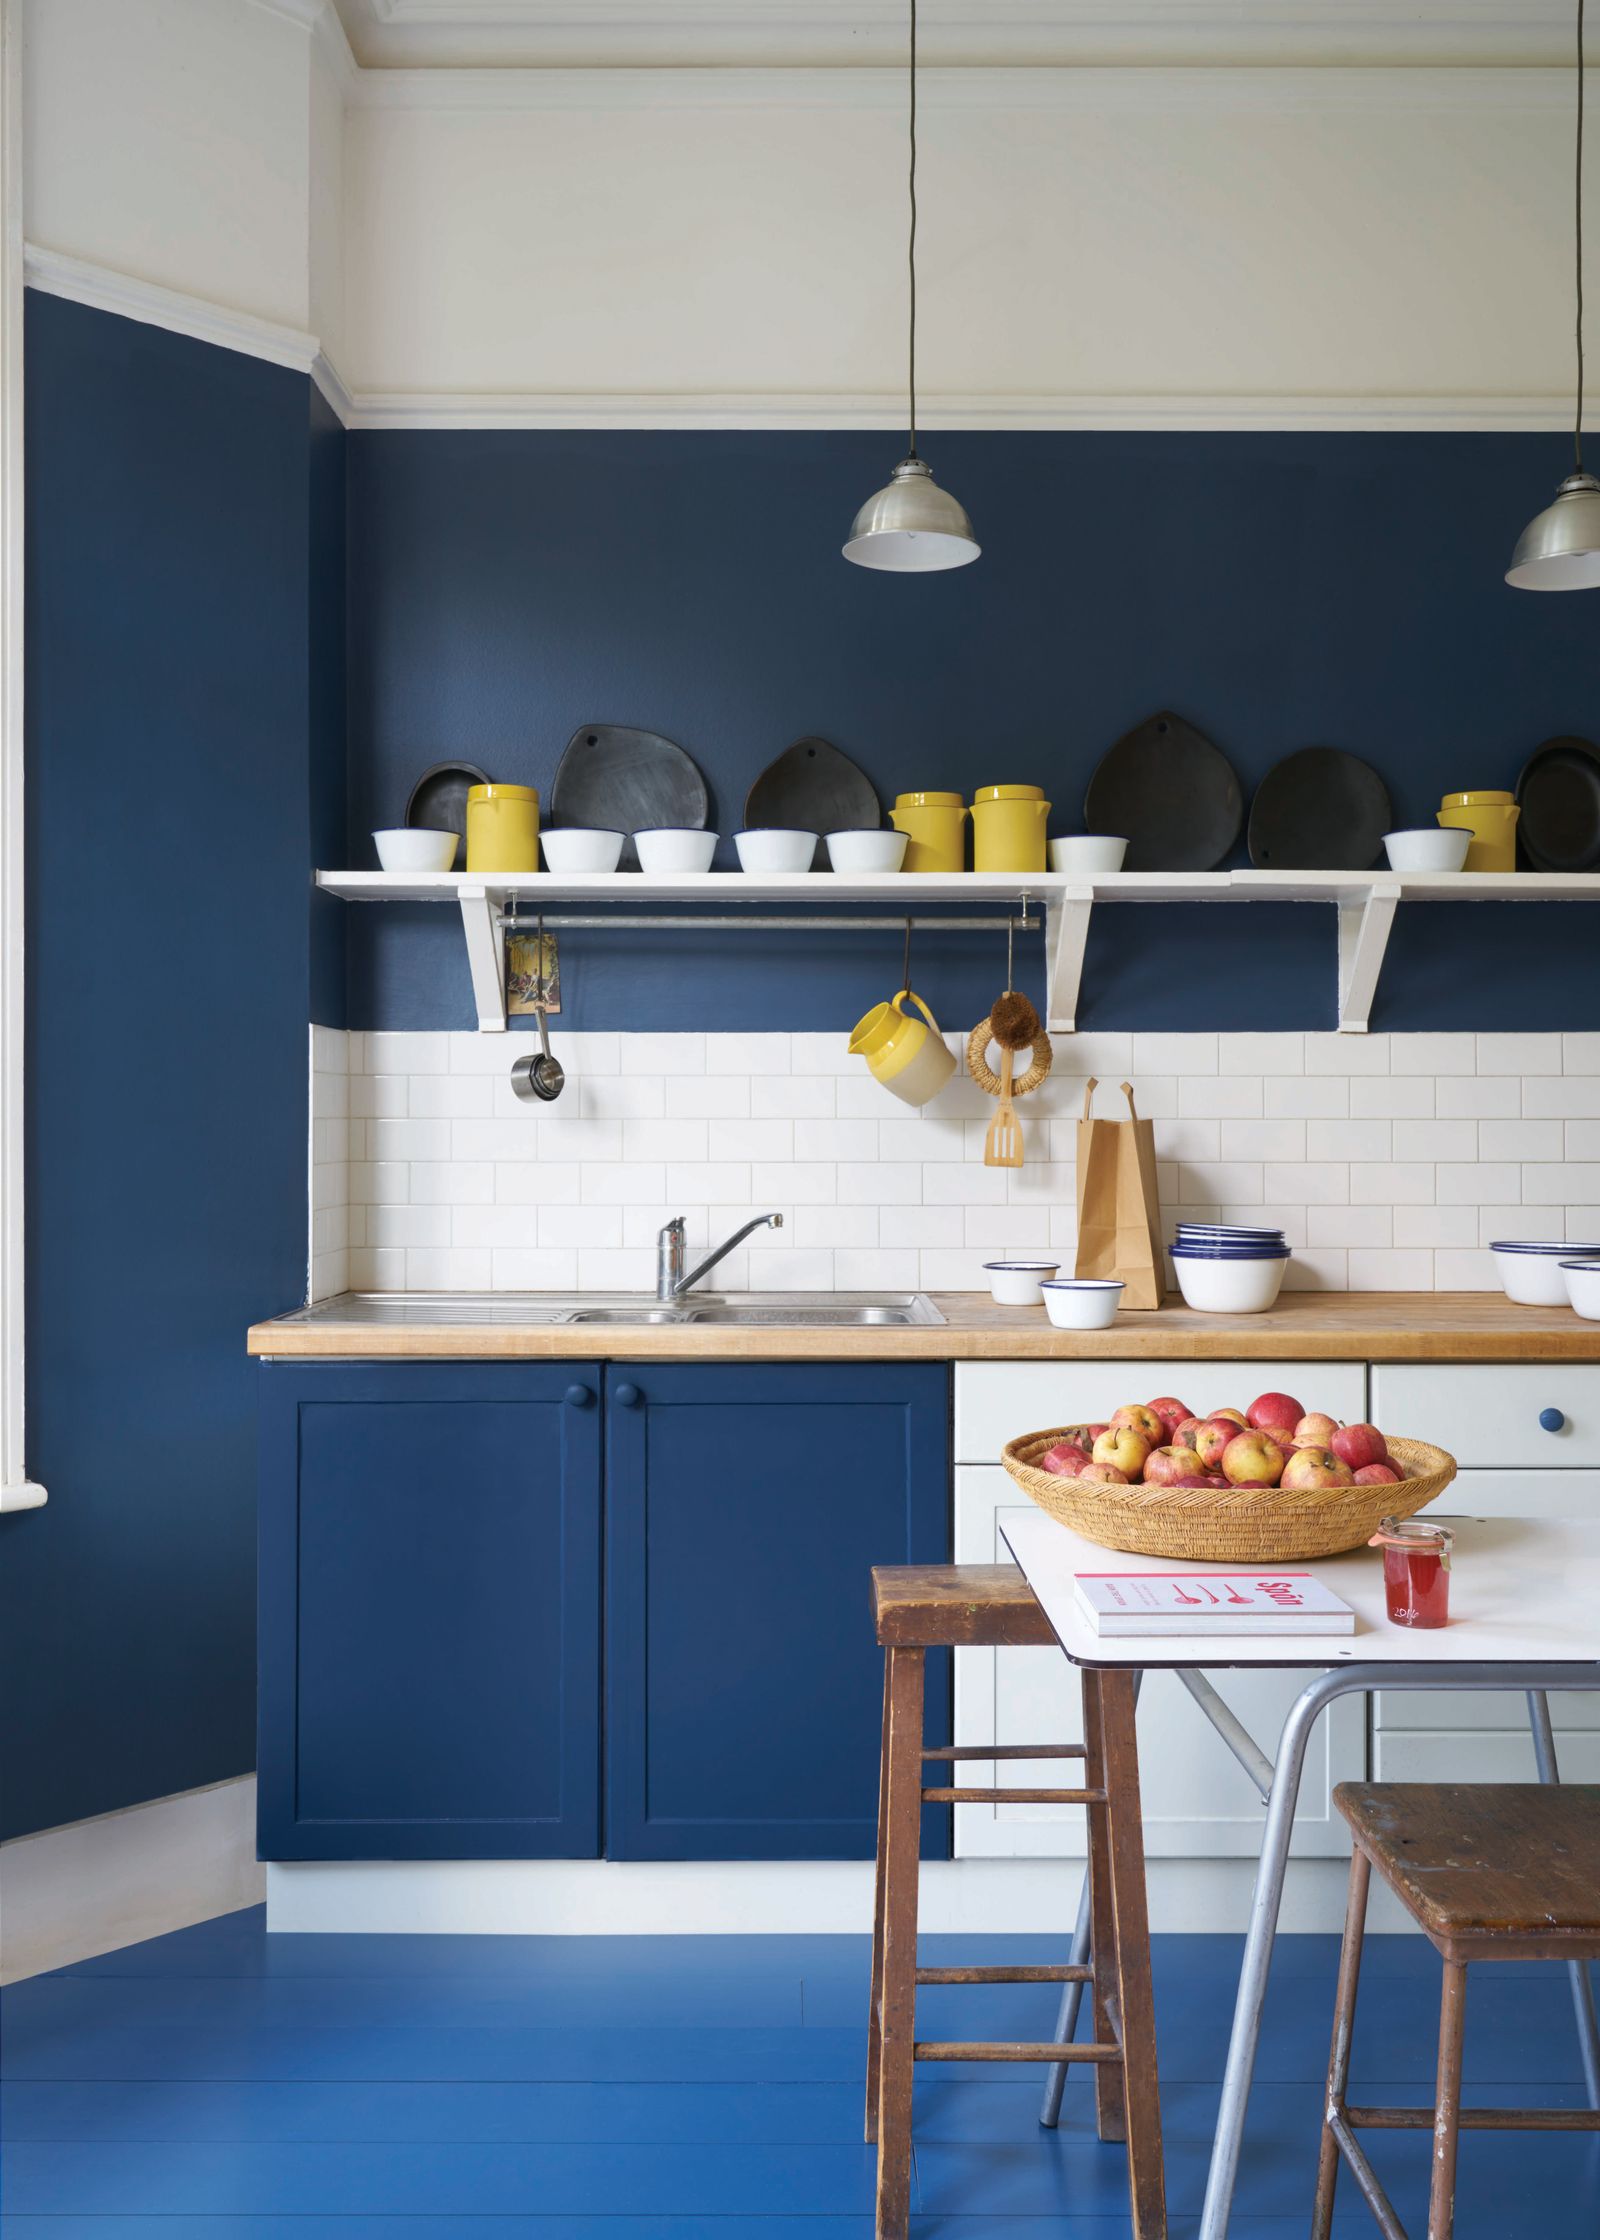 Fitting a kitchen made easy: here's how to do it right | Real Homes